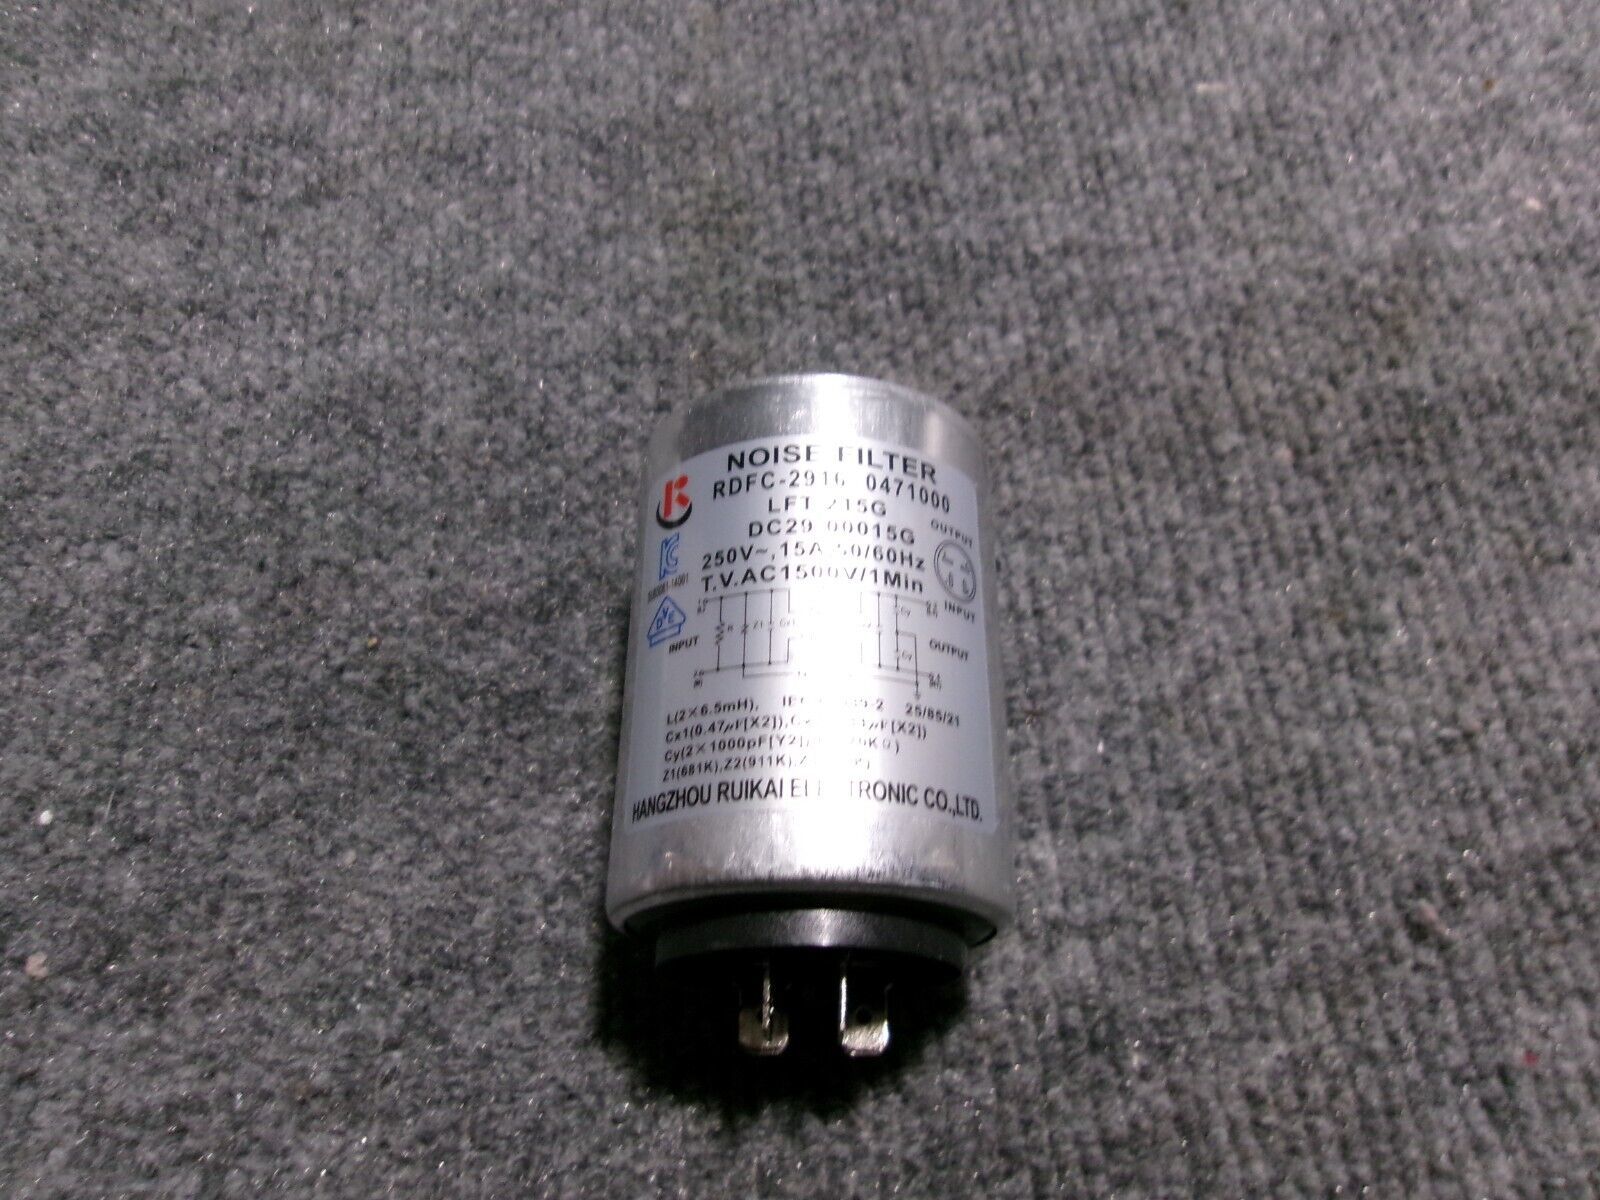 Primary image for DC29-00015G SAMSUNG WASHER NOISE FILTER